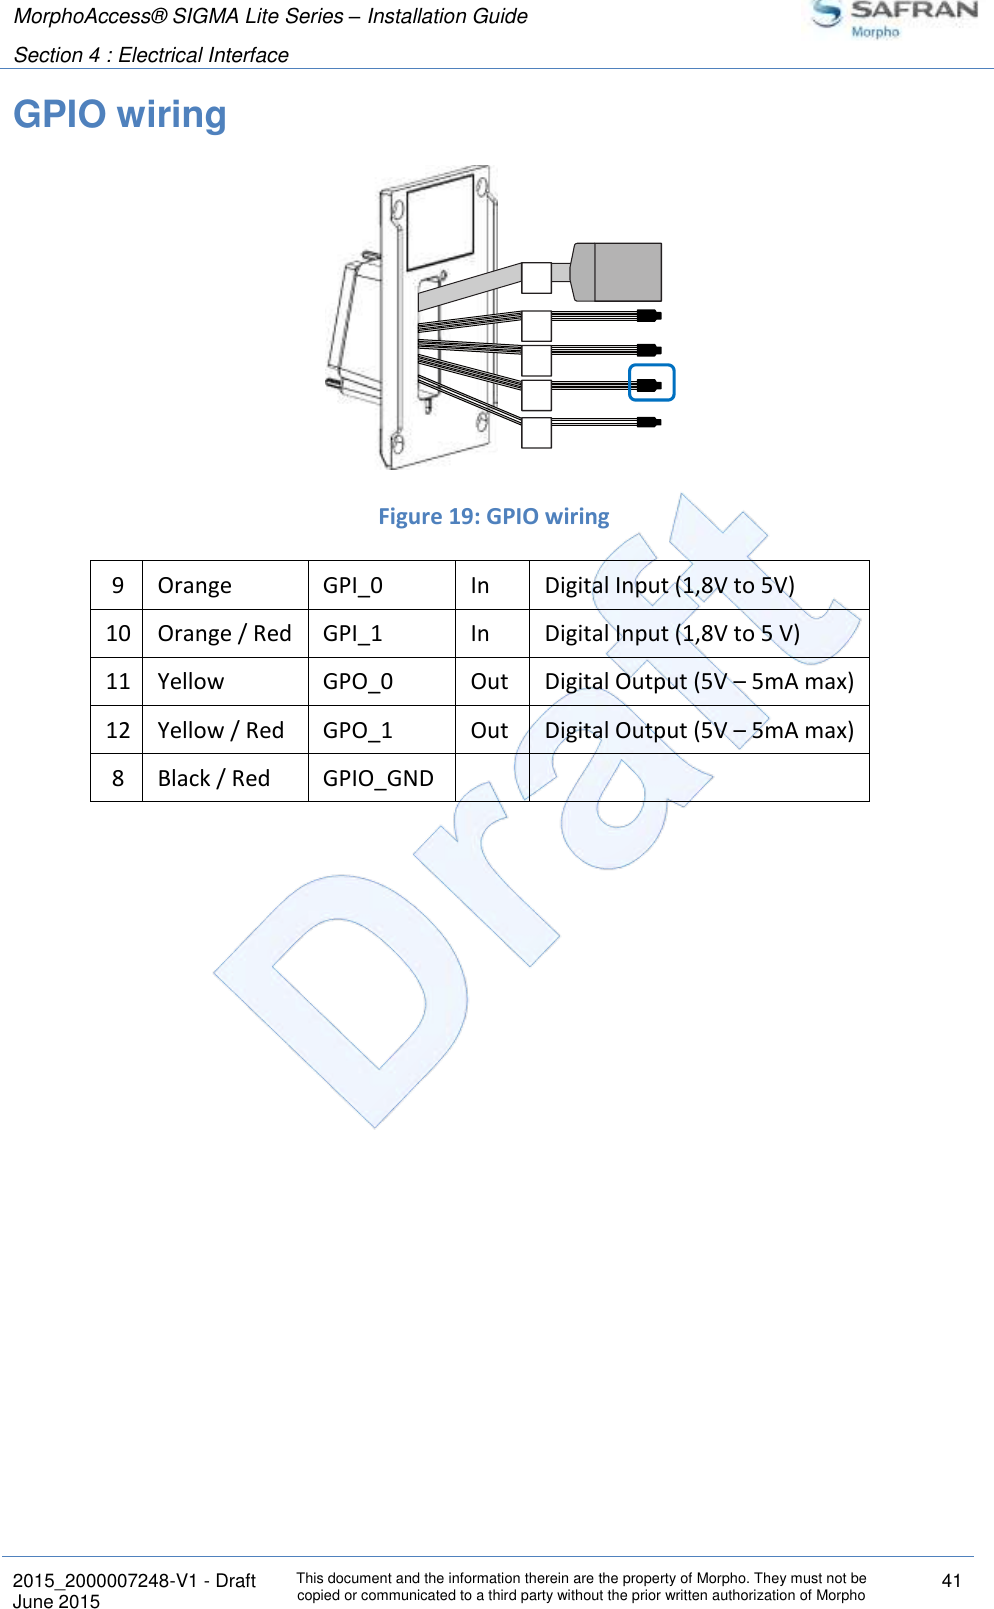 MorphoAccess® SIGMA Lite Series – Installation Guide  Section 4 : Electrical Interface   2015_2000007248-V1 - Draft This document and the information therein are the property of Morpho. They must not be copied or communicated to a third party without the prior written authorization of Morpho 41 June 2015   GPIO wiring   Figure 19: GPIO wiring 9 Orange GPI_0 In Digital Input (1,8V to 5V)  10 Orange / Red GPI_1 In Digital Input (1,8V to 5 V) 11 Yellow GPO_0 Out Digital Output (5V – 5mA max)  12 Yellow / Red GPO_1 Out Digital Output (5V – 5mA max) 8 Black / Red GPIO_GND      